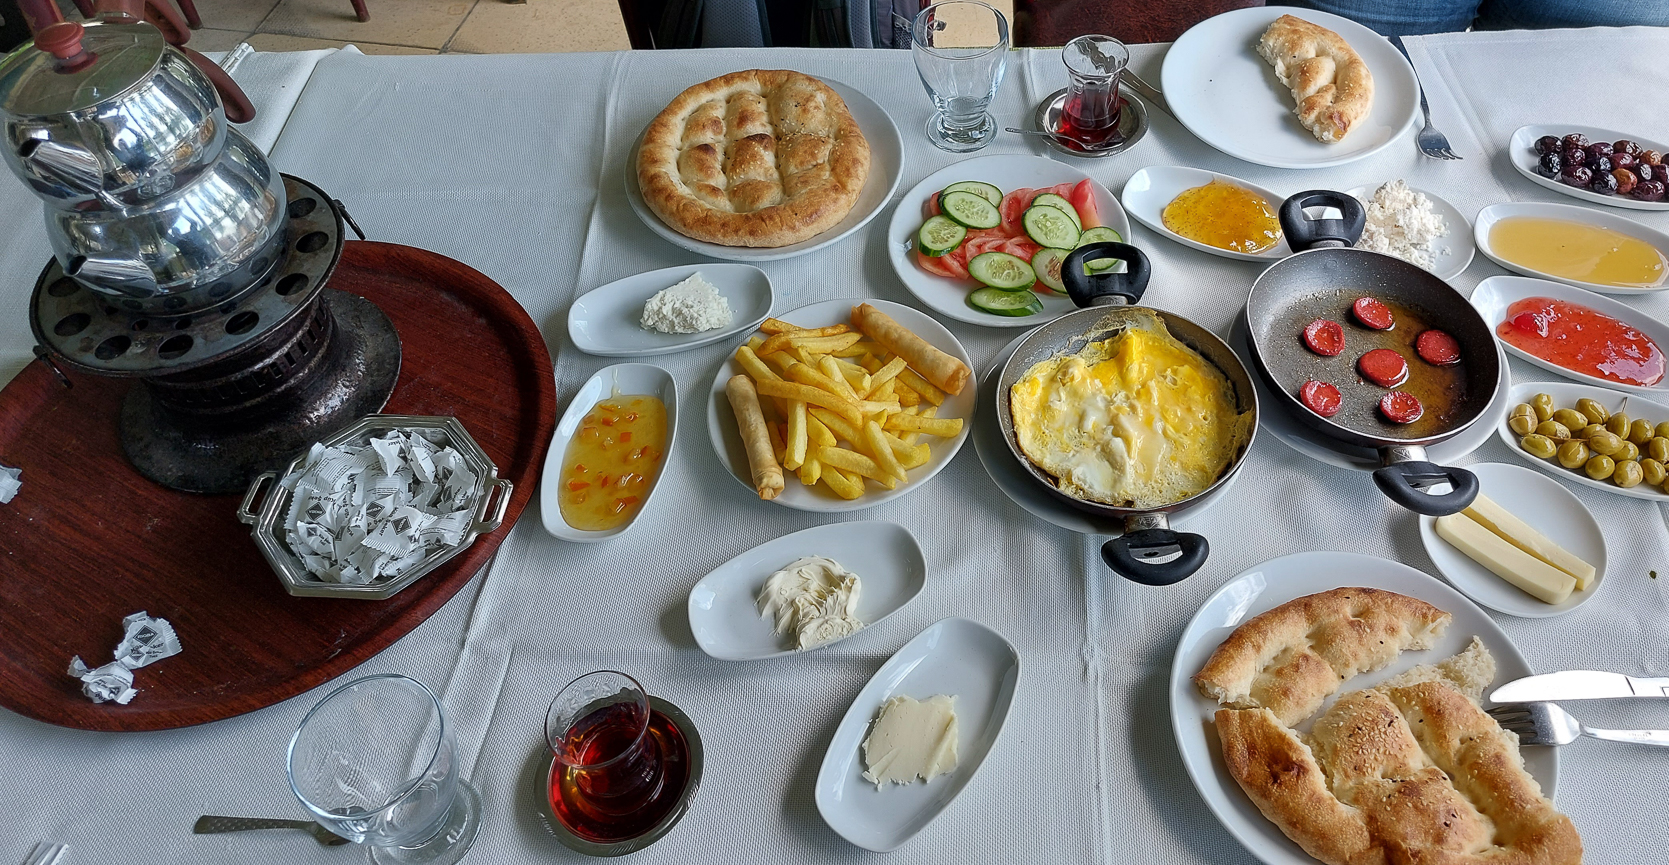 <span  class="uc_style_uc_tiles_grid_image_elementor_uc_items_attribute_title" style="color:#ffffff;">...as I said 😉 ... here: typical Turkish breakfast (a feast)</span>